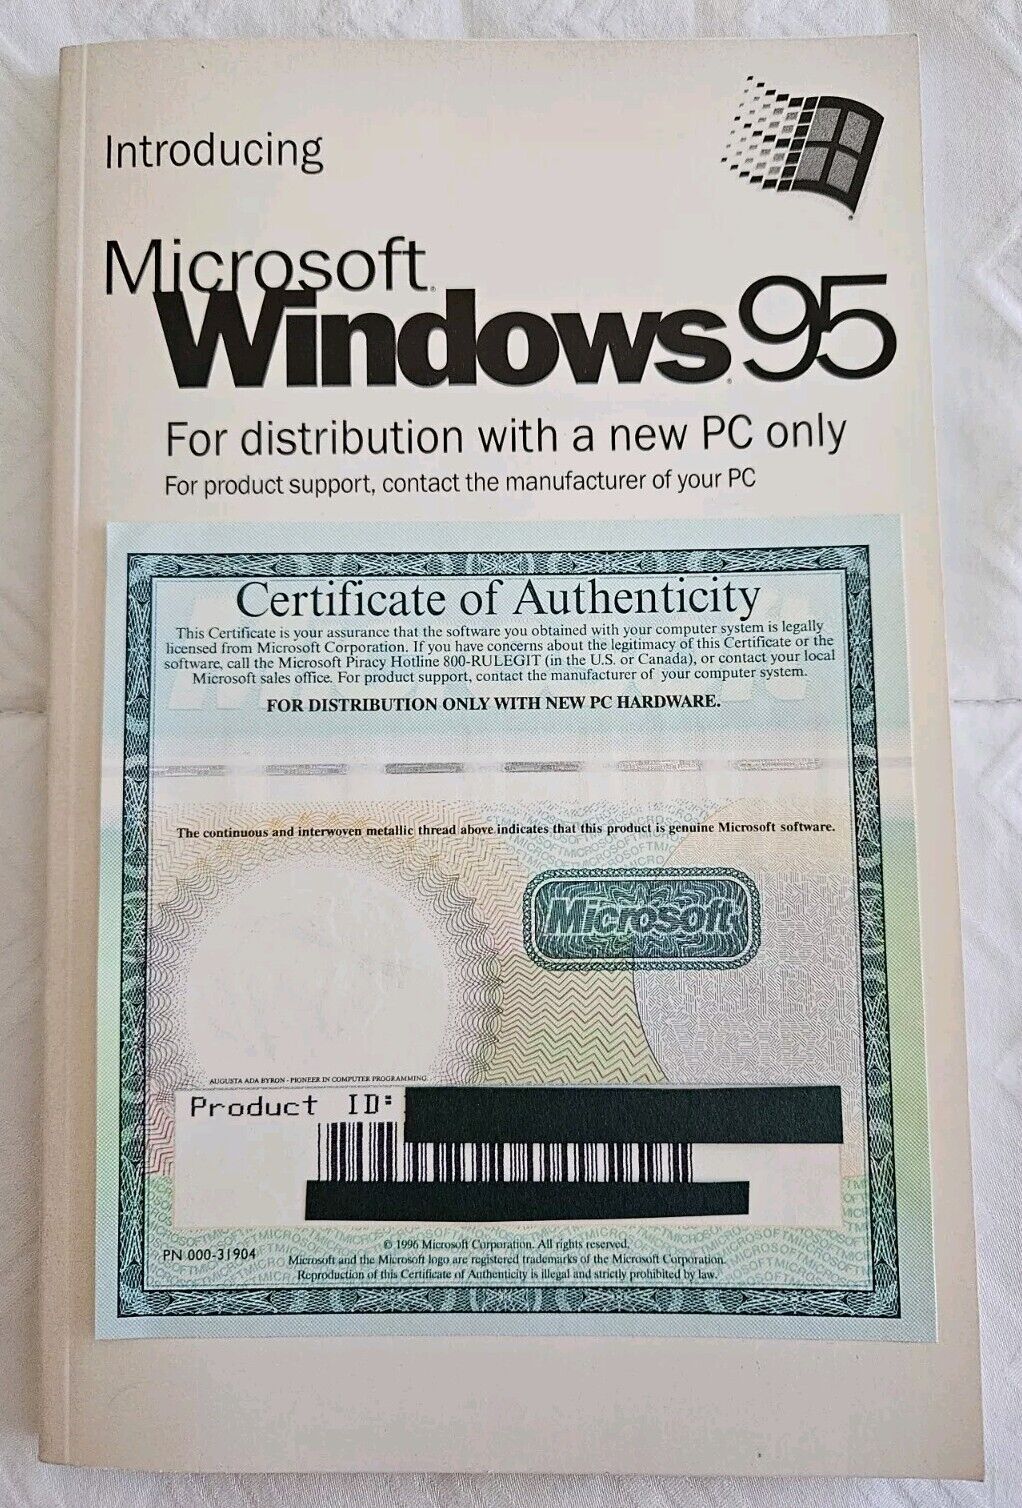 Microsoft Windows 95 Booklet/Manual With Certificate Of Authenticity